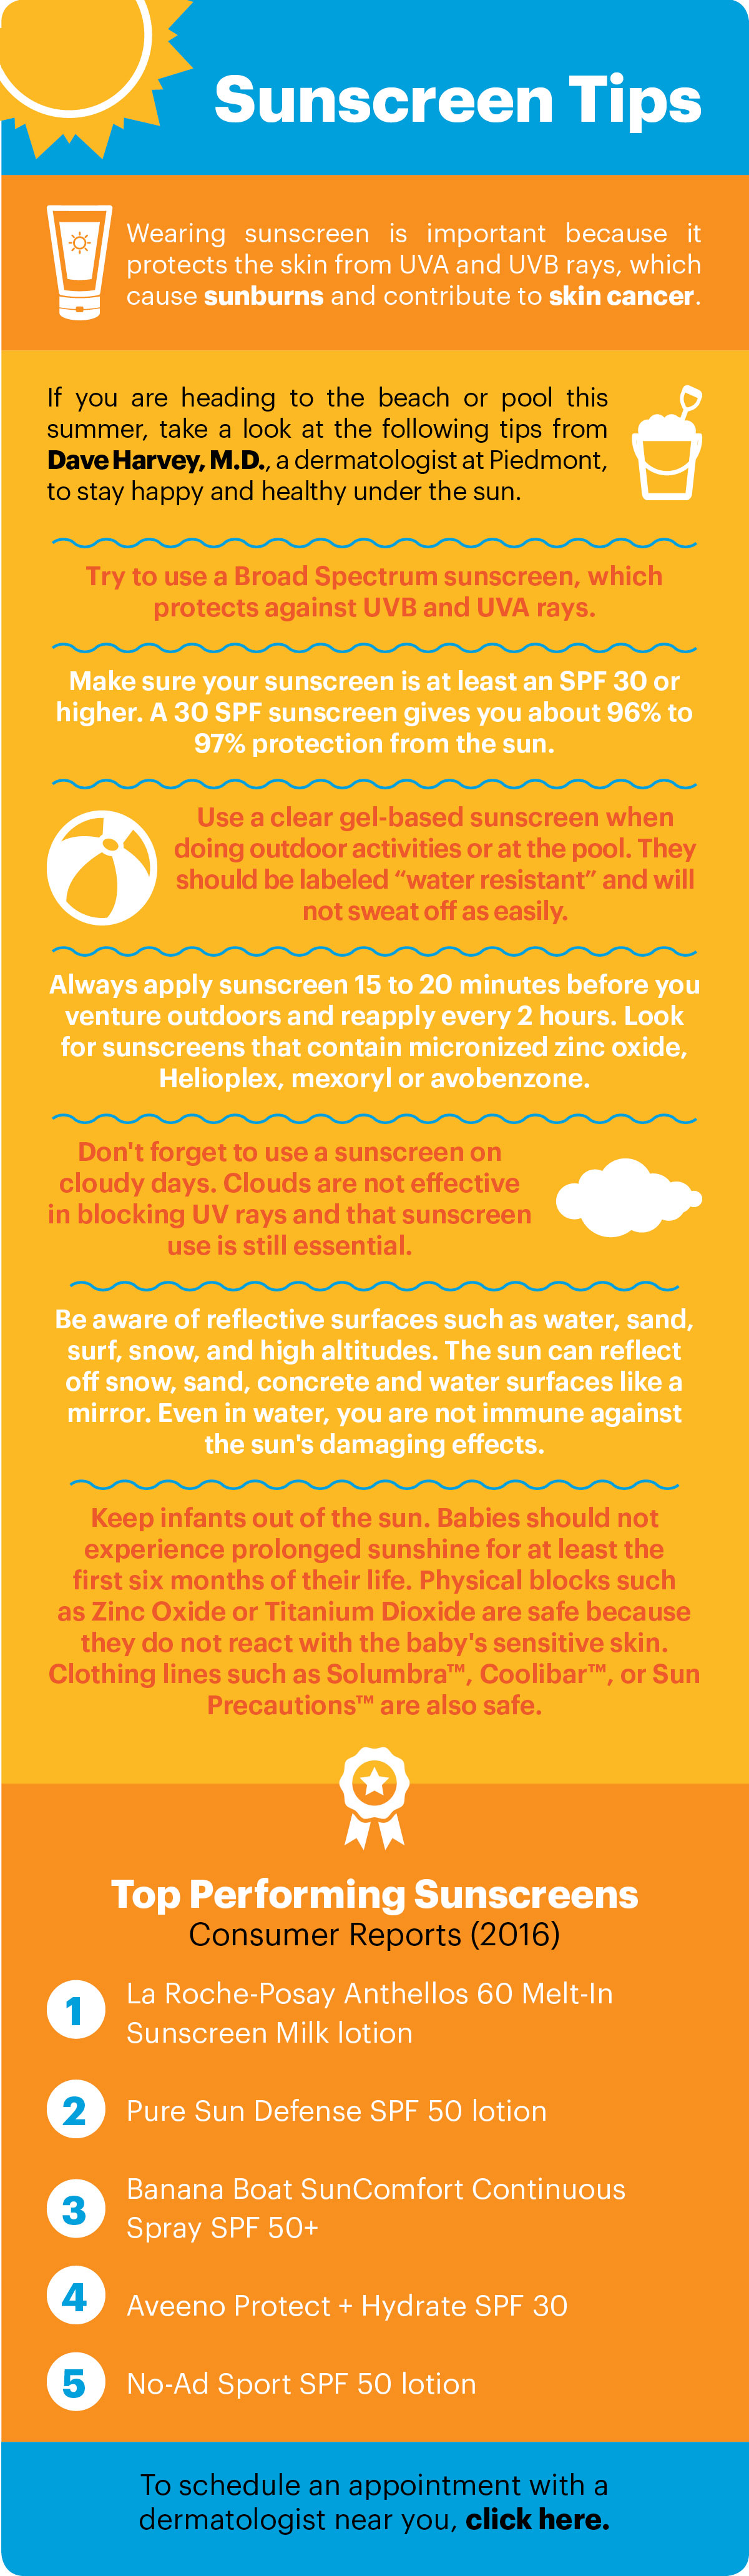 Sunscreen safety tips